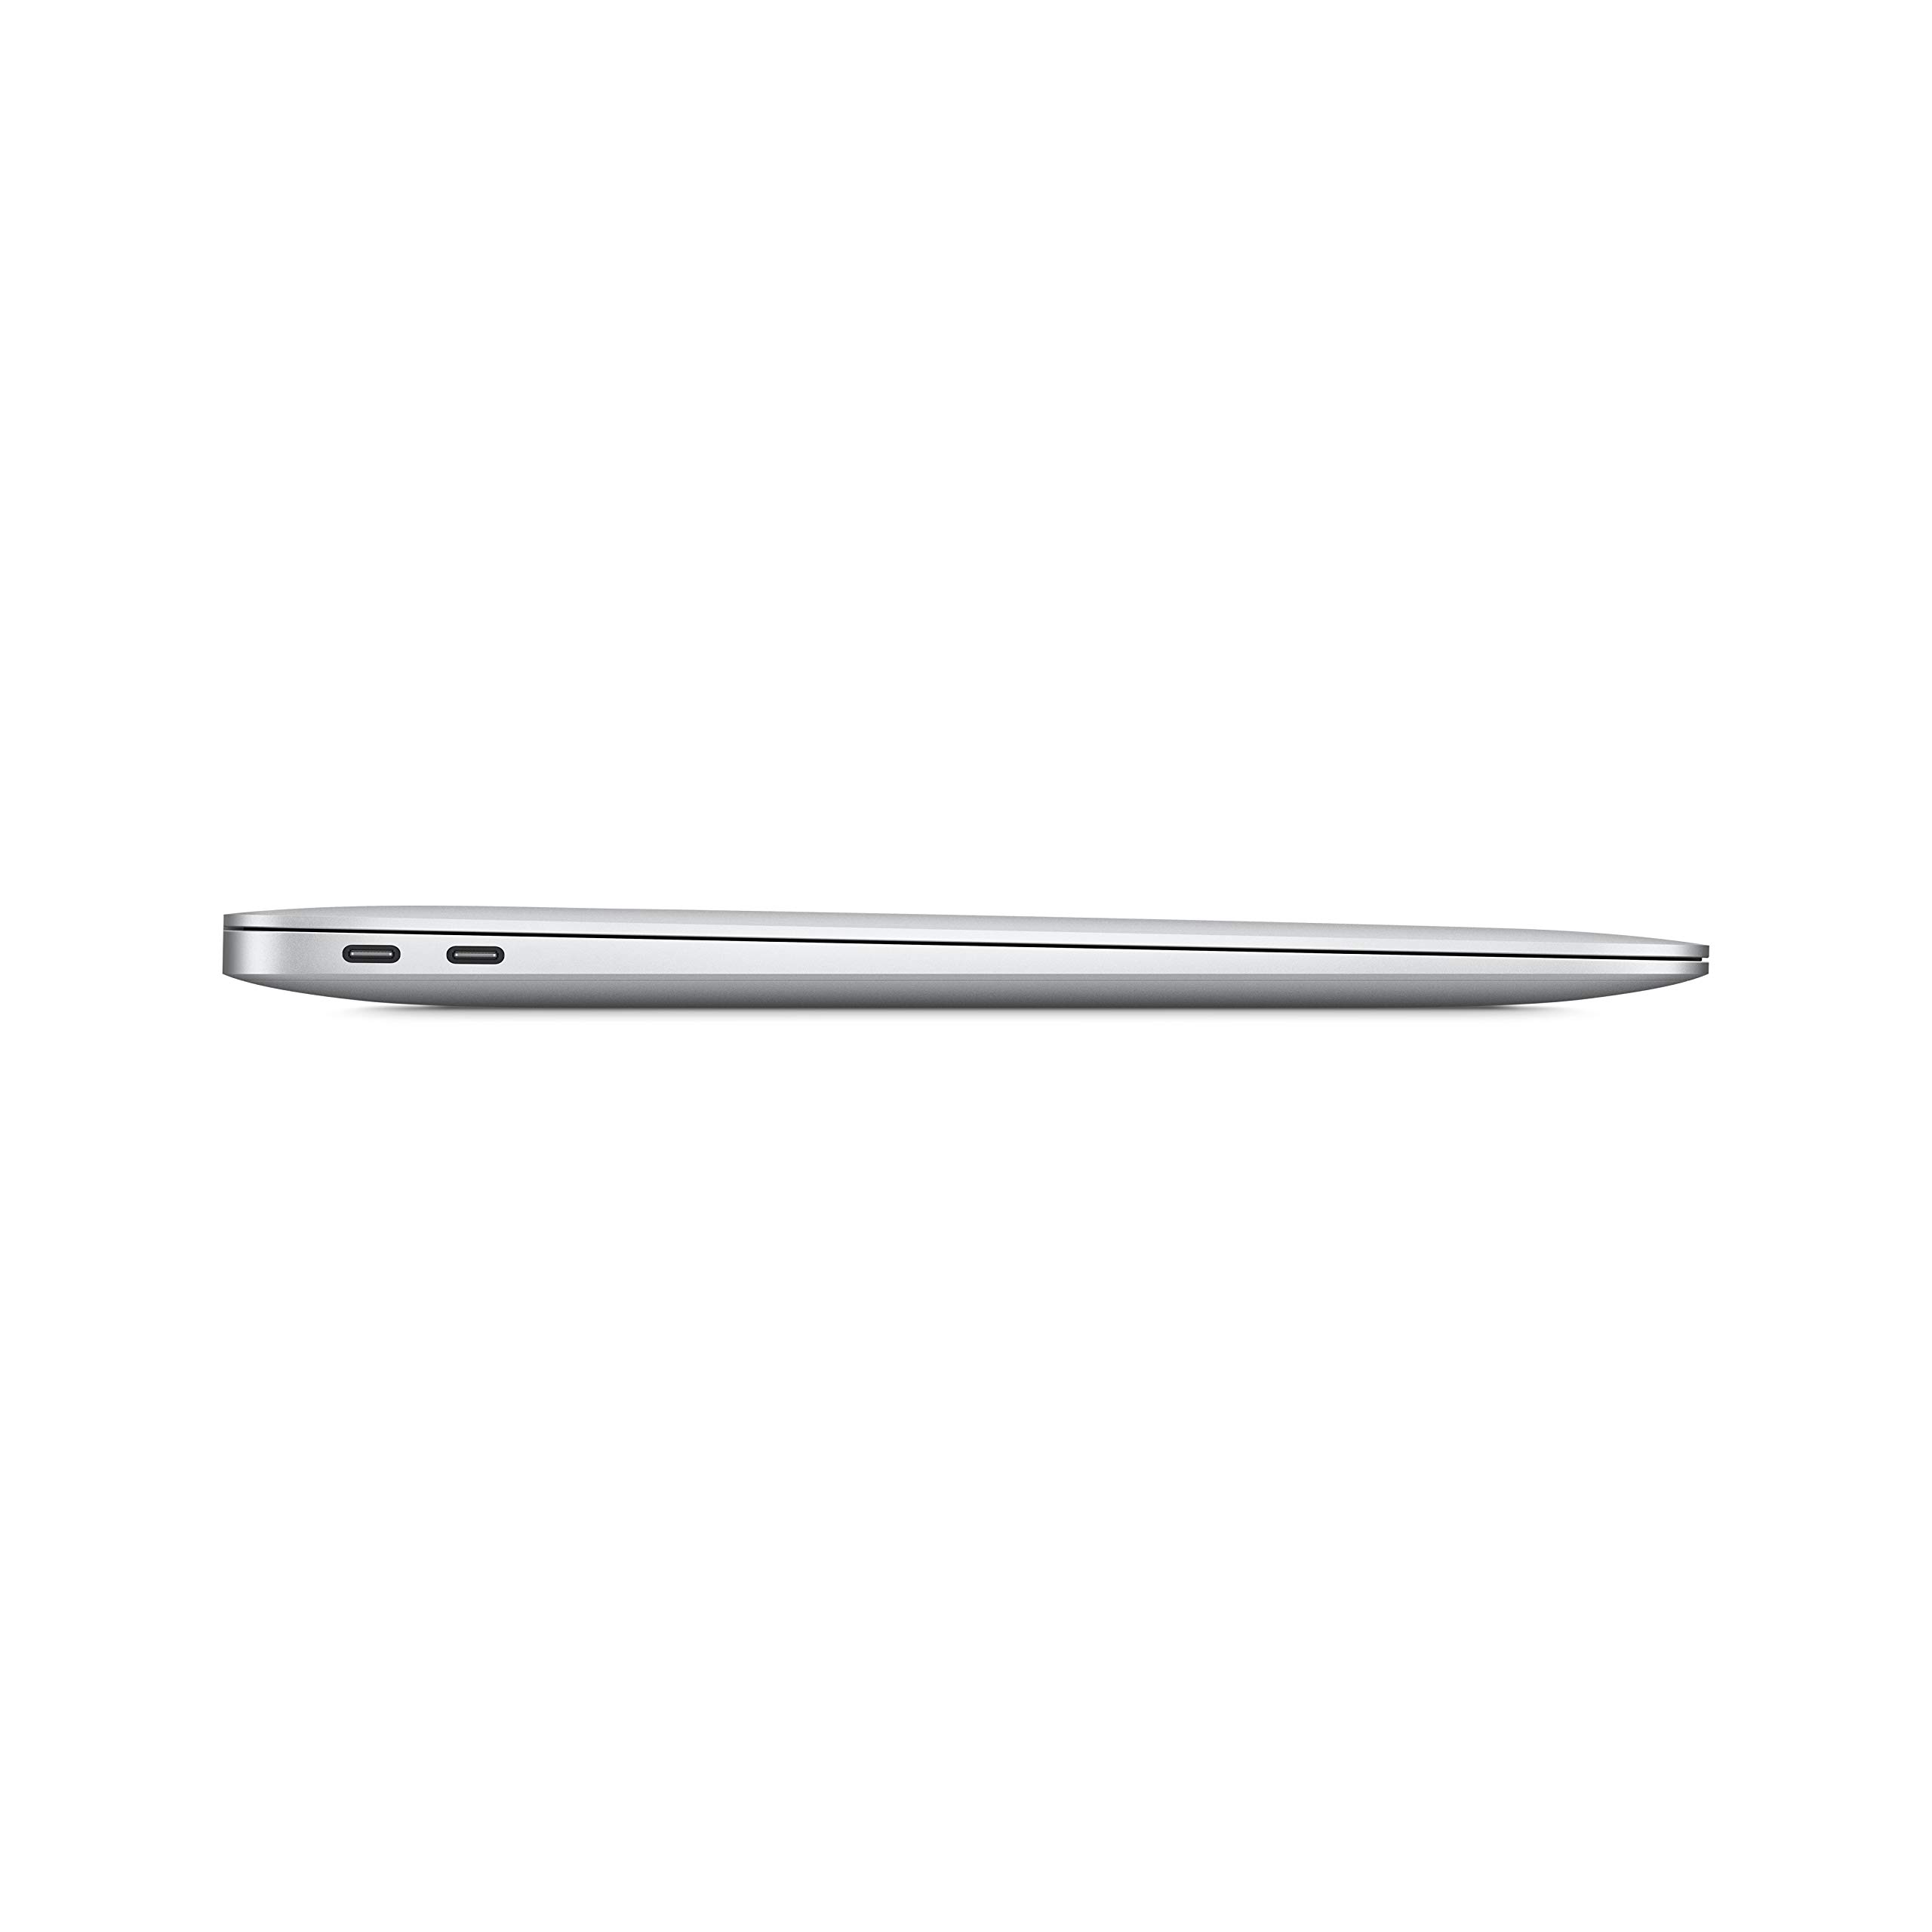 Apple 2020 MacBook Air Laptop M1 Chip, 13" Retina Display, 8GB RAM, 512GB SSD Storage, Backlit Keyboard, FaceTime HD Camera, Touch ID. Works with iPhone/iPad; Silver